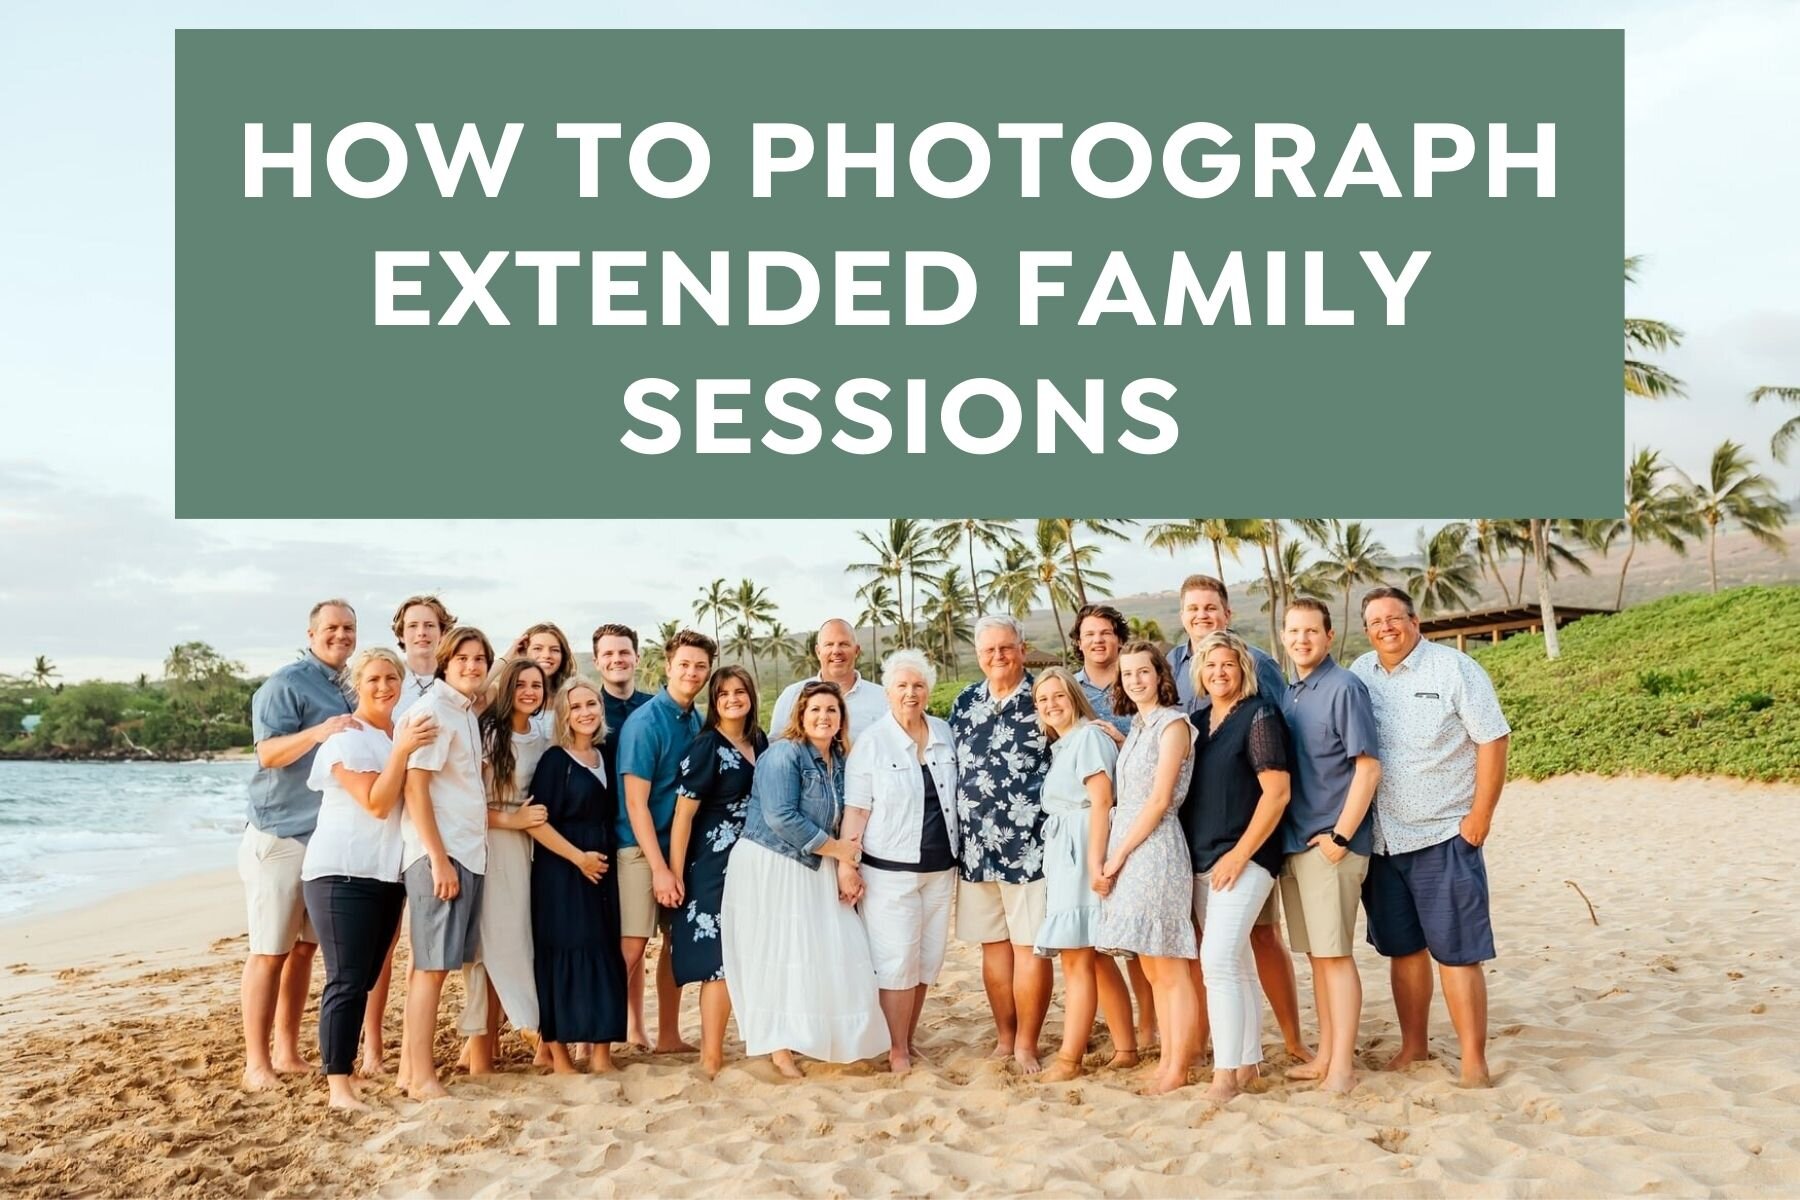 tips-extended-family-photography-sessions.jpg